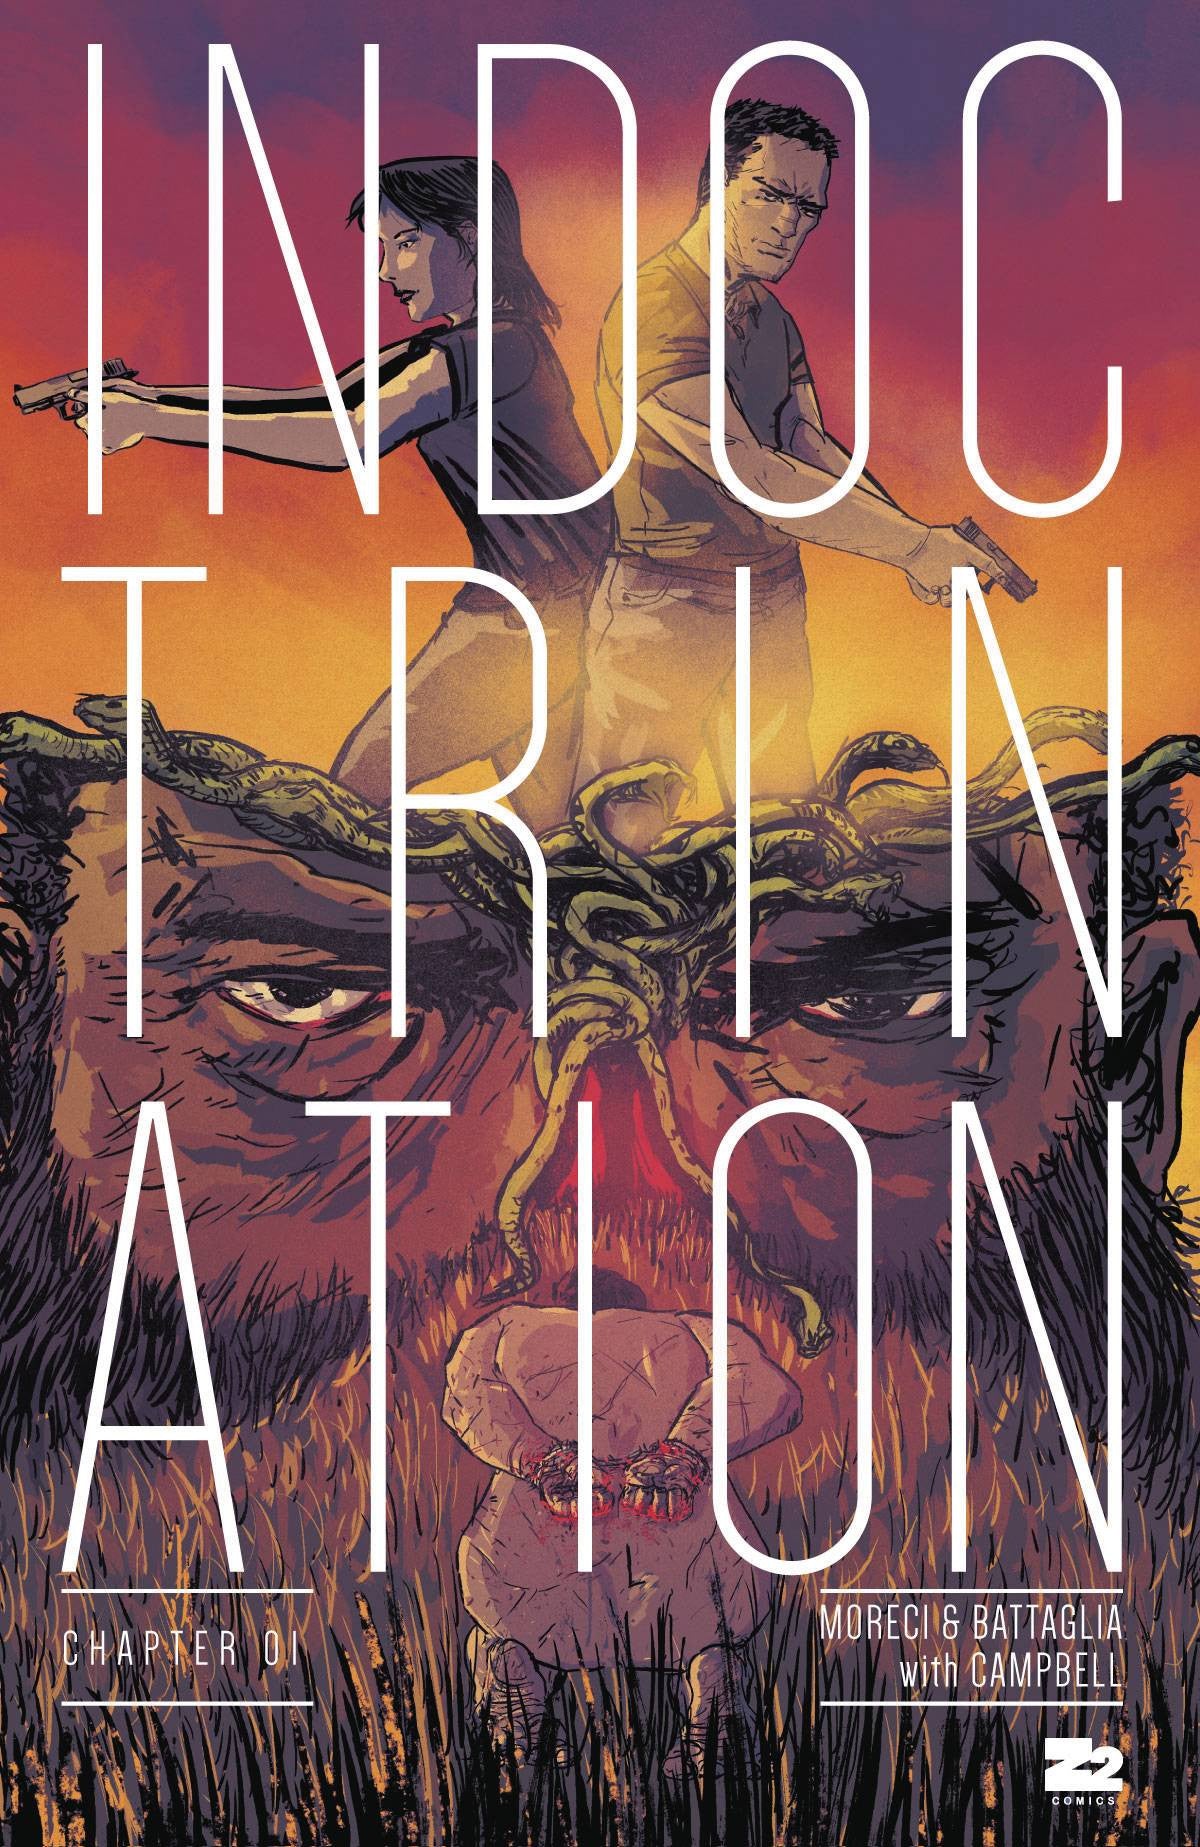 INDOCTRINATION #1 COVER